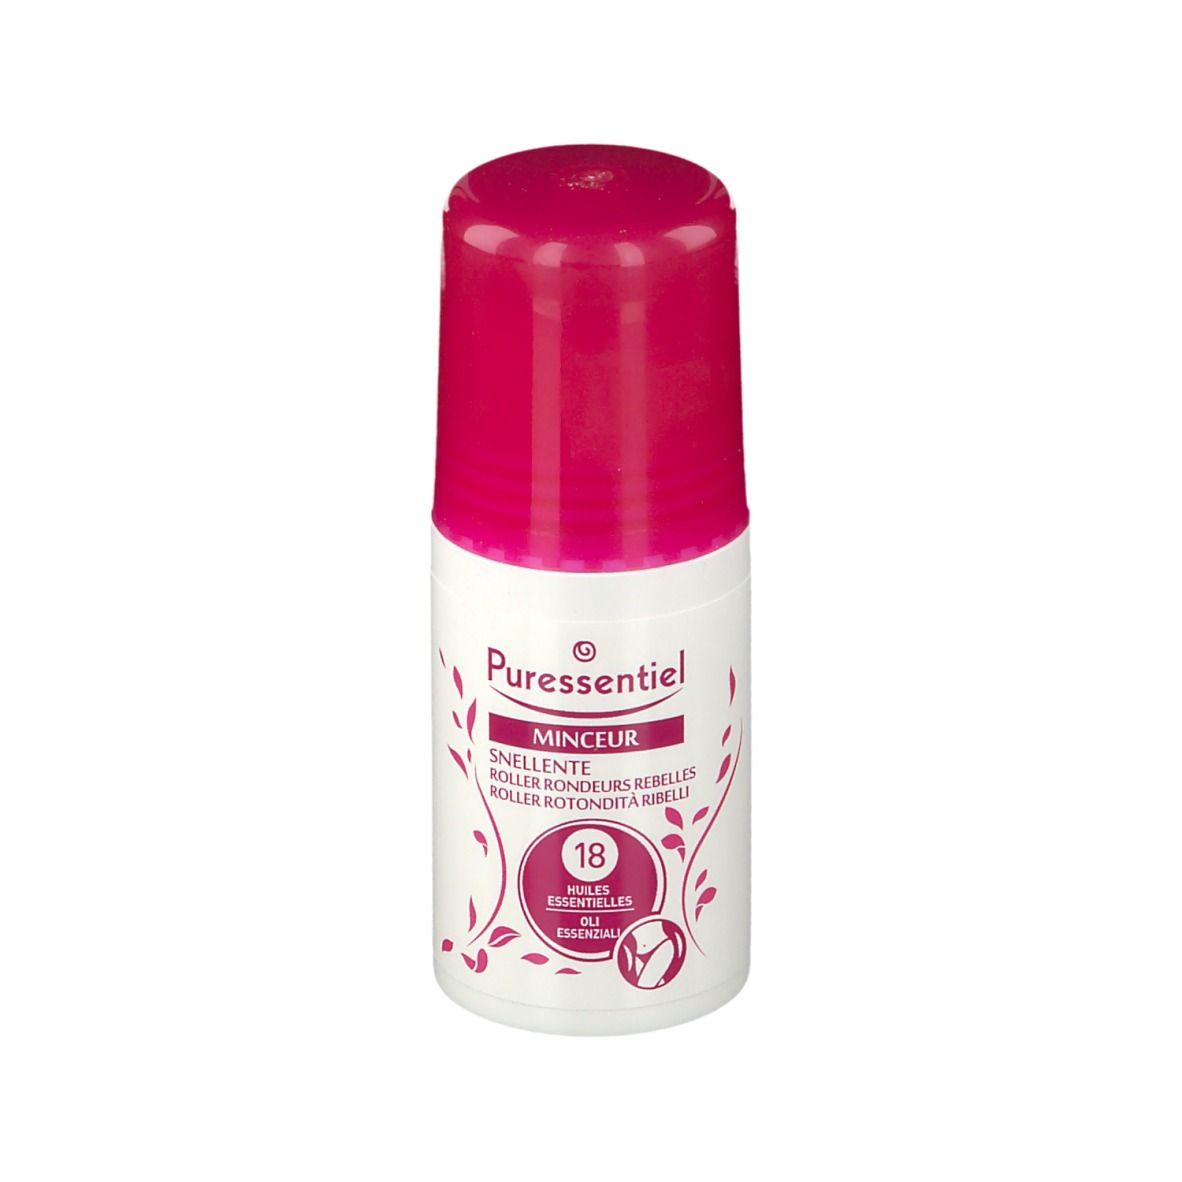 Image of Puressentiel MINCEUR Anti-Cellulite Roll-On